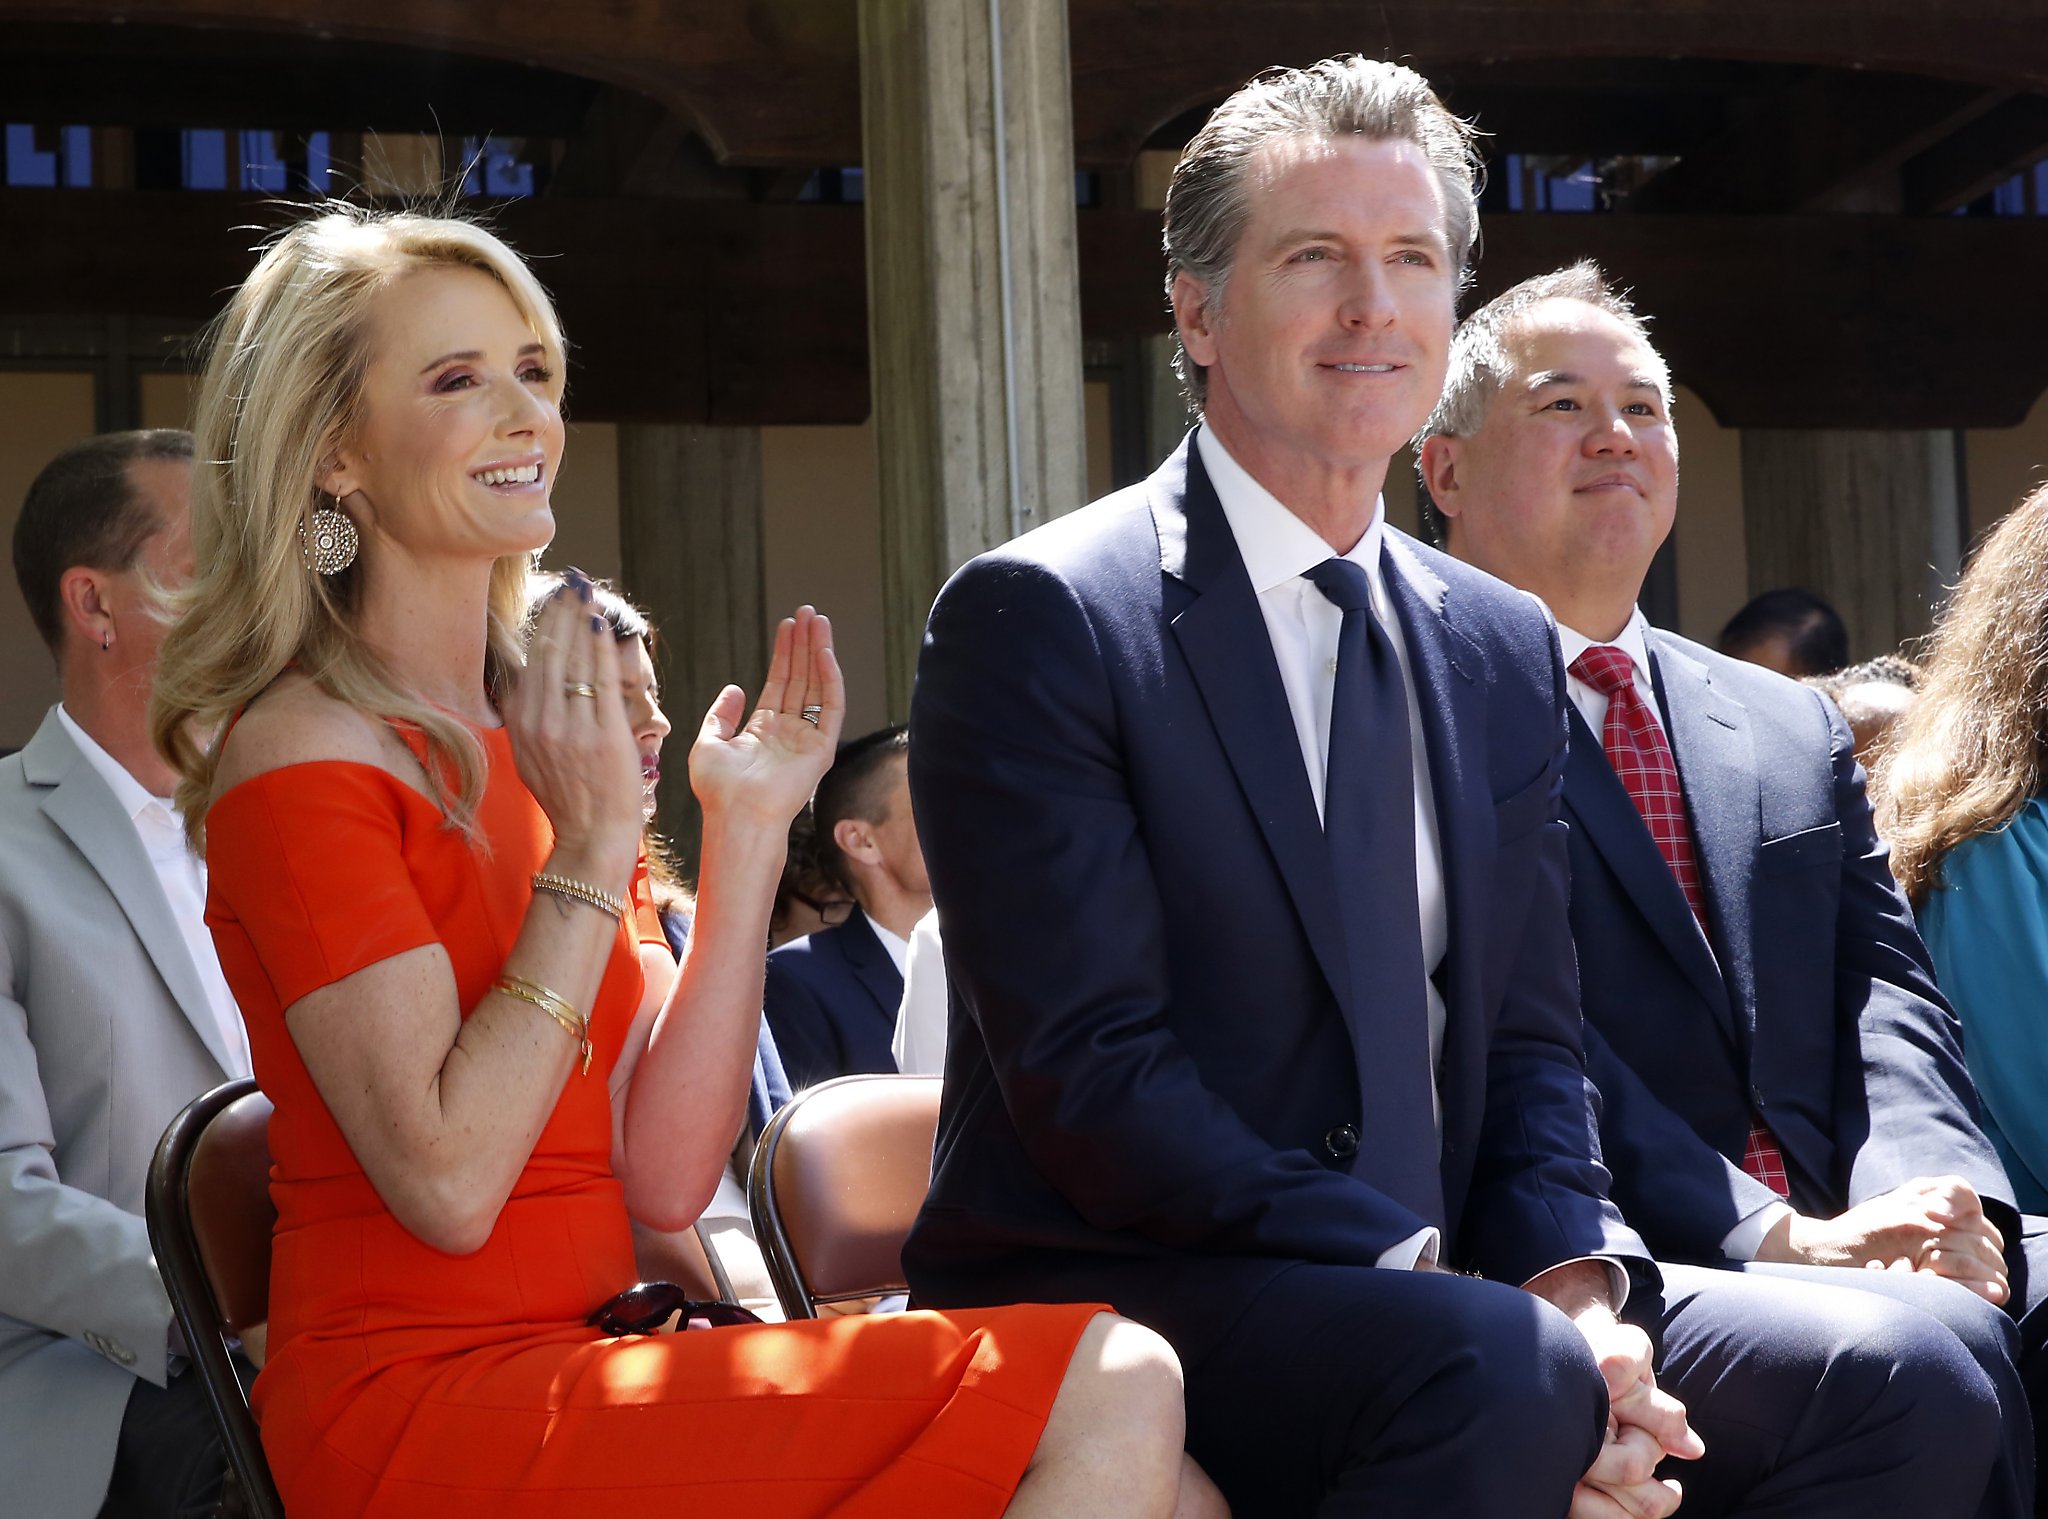 newsom-tax-returns-show-1-7-million-adjusted-income-business-and-real